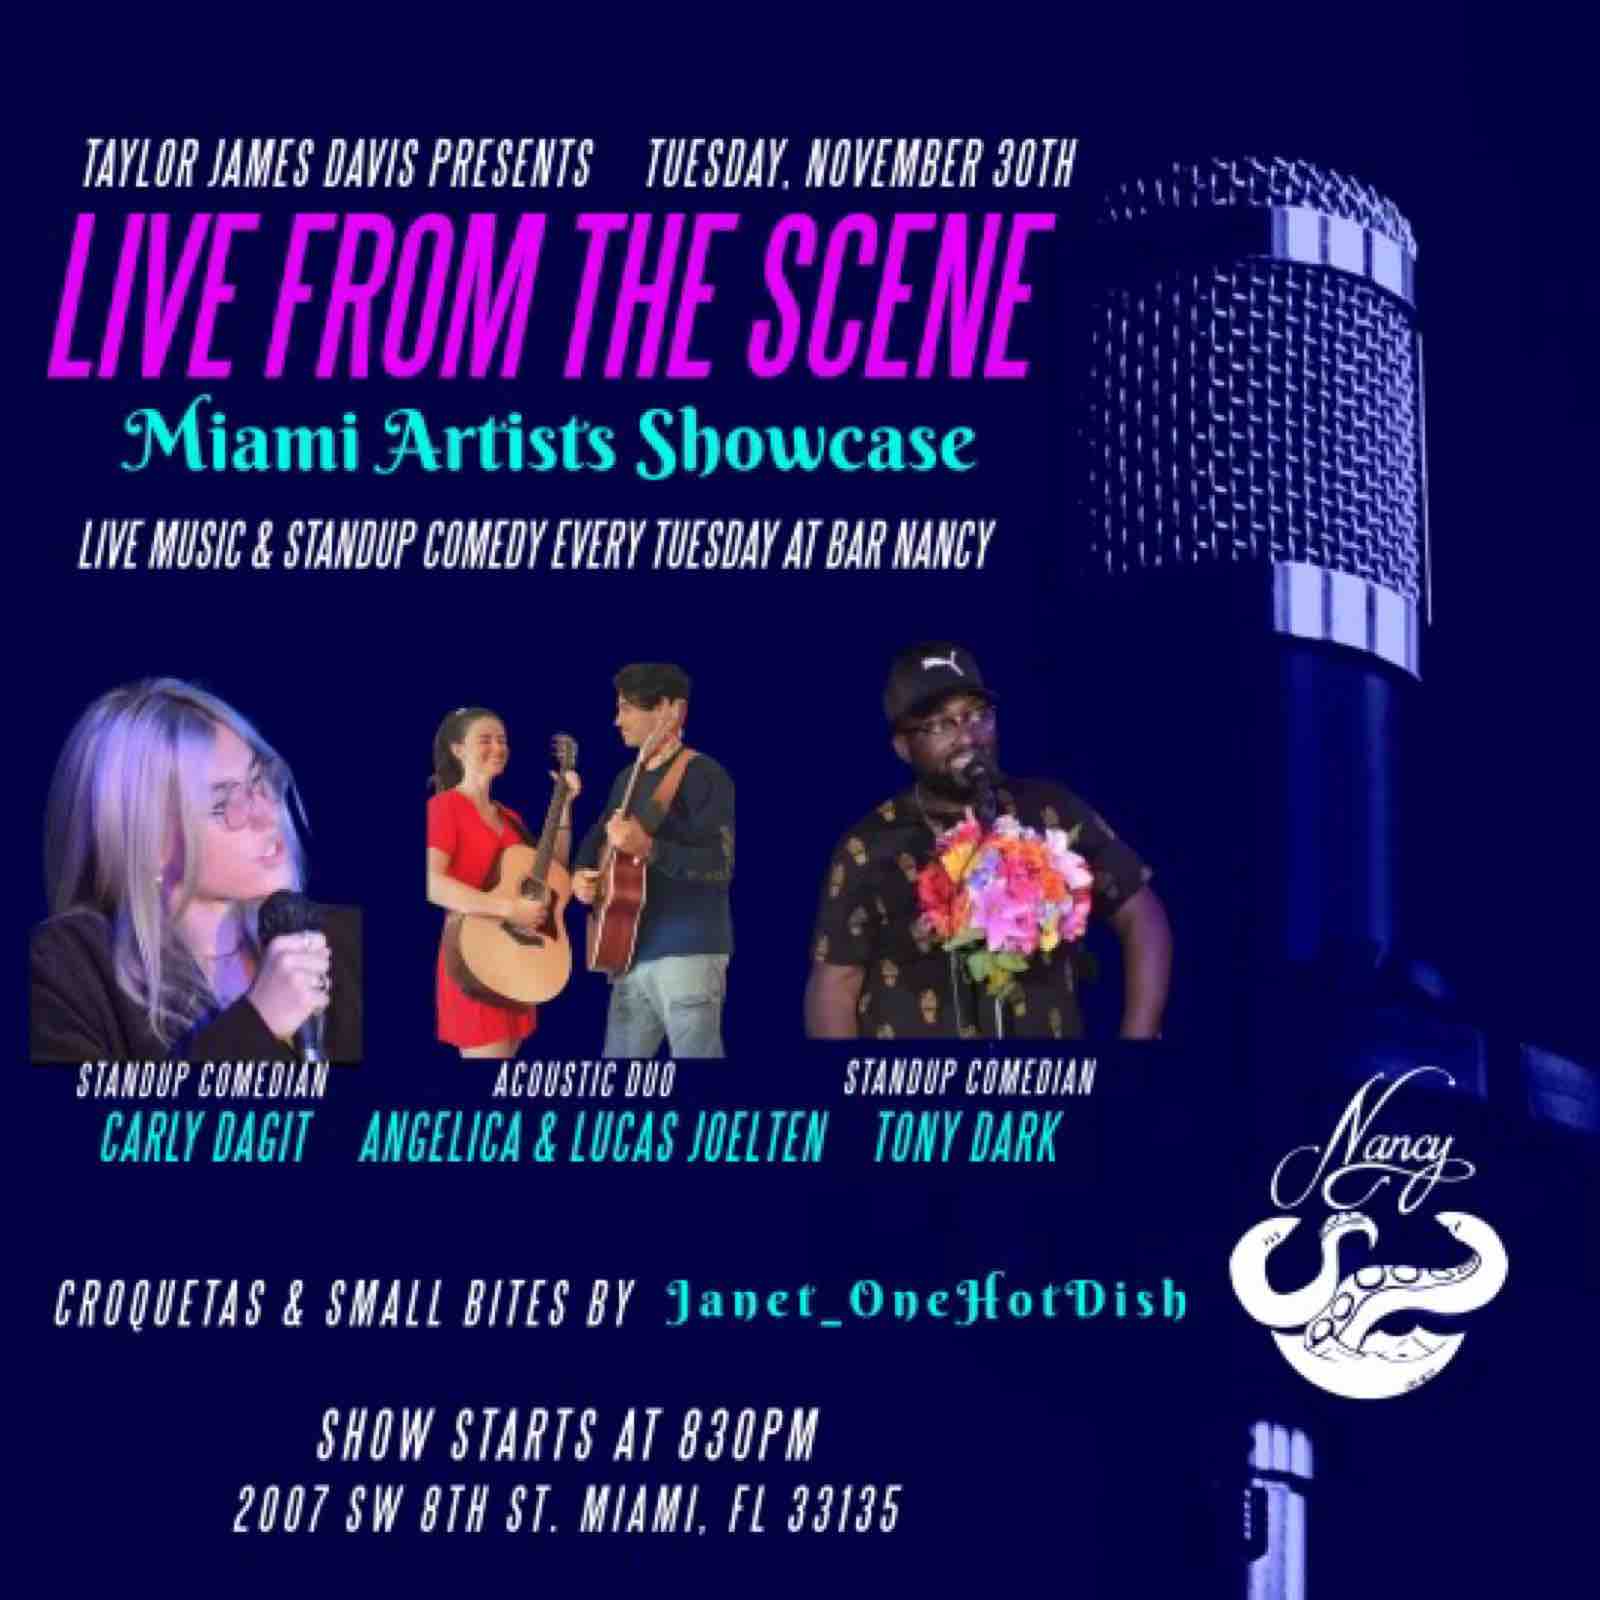 Taylor James Davis Presents - Live From The Scene Showcase at Bar Nancy every Tuesday